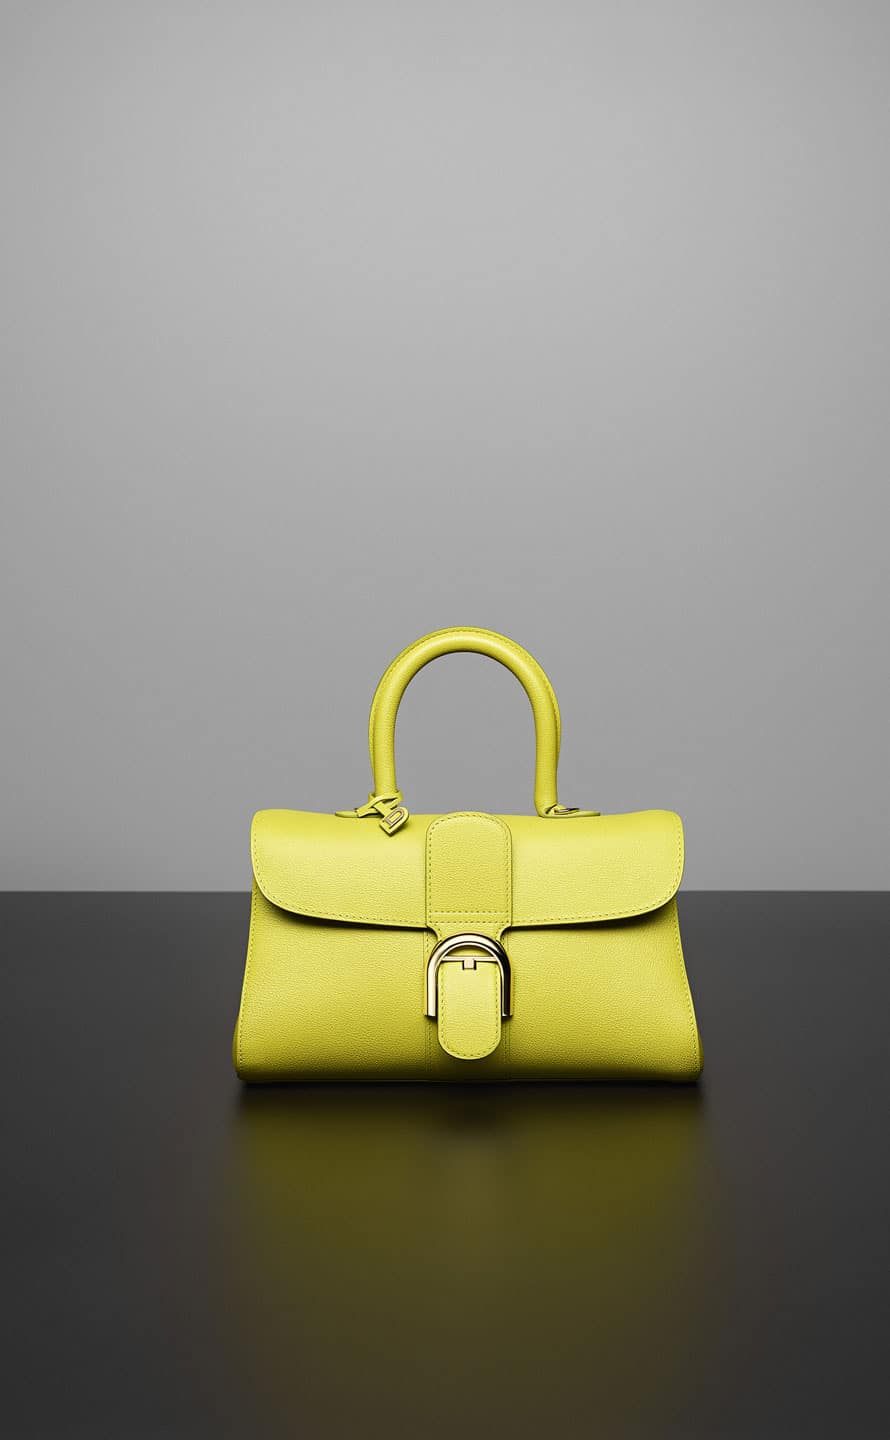 Delvaux Fall/Winter 2016 Bag Collection Featuring the Tempête Mini